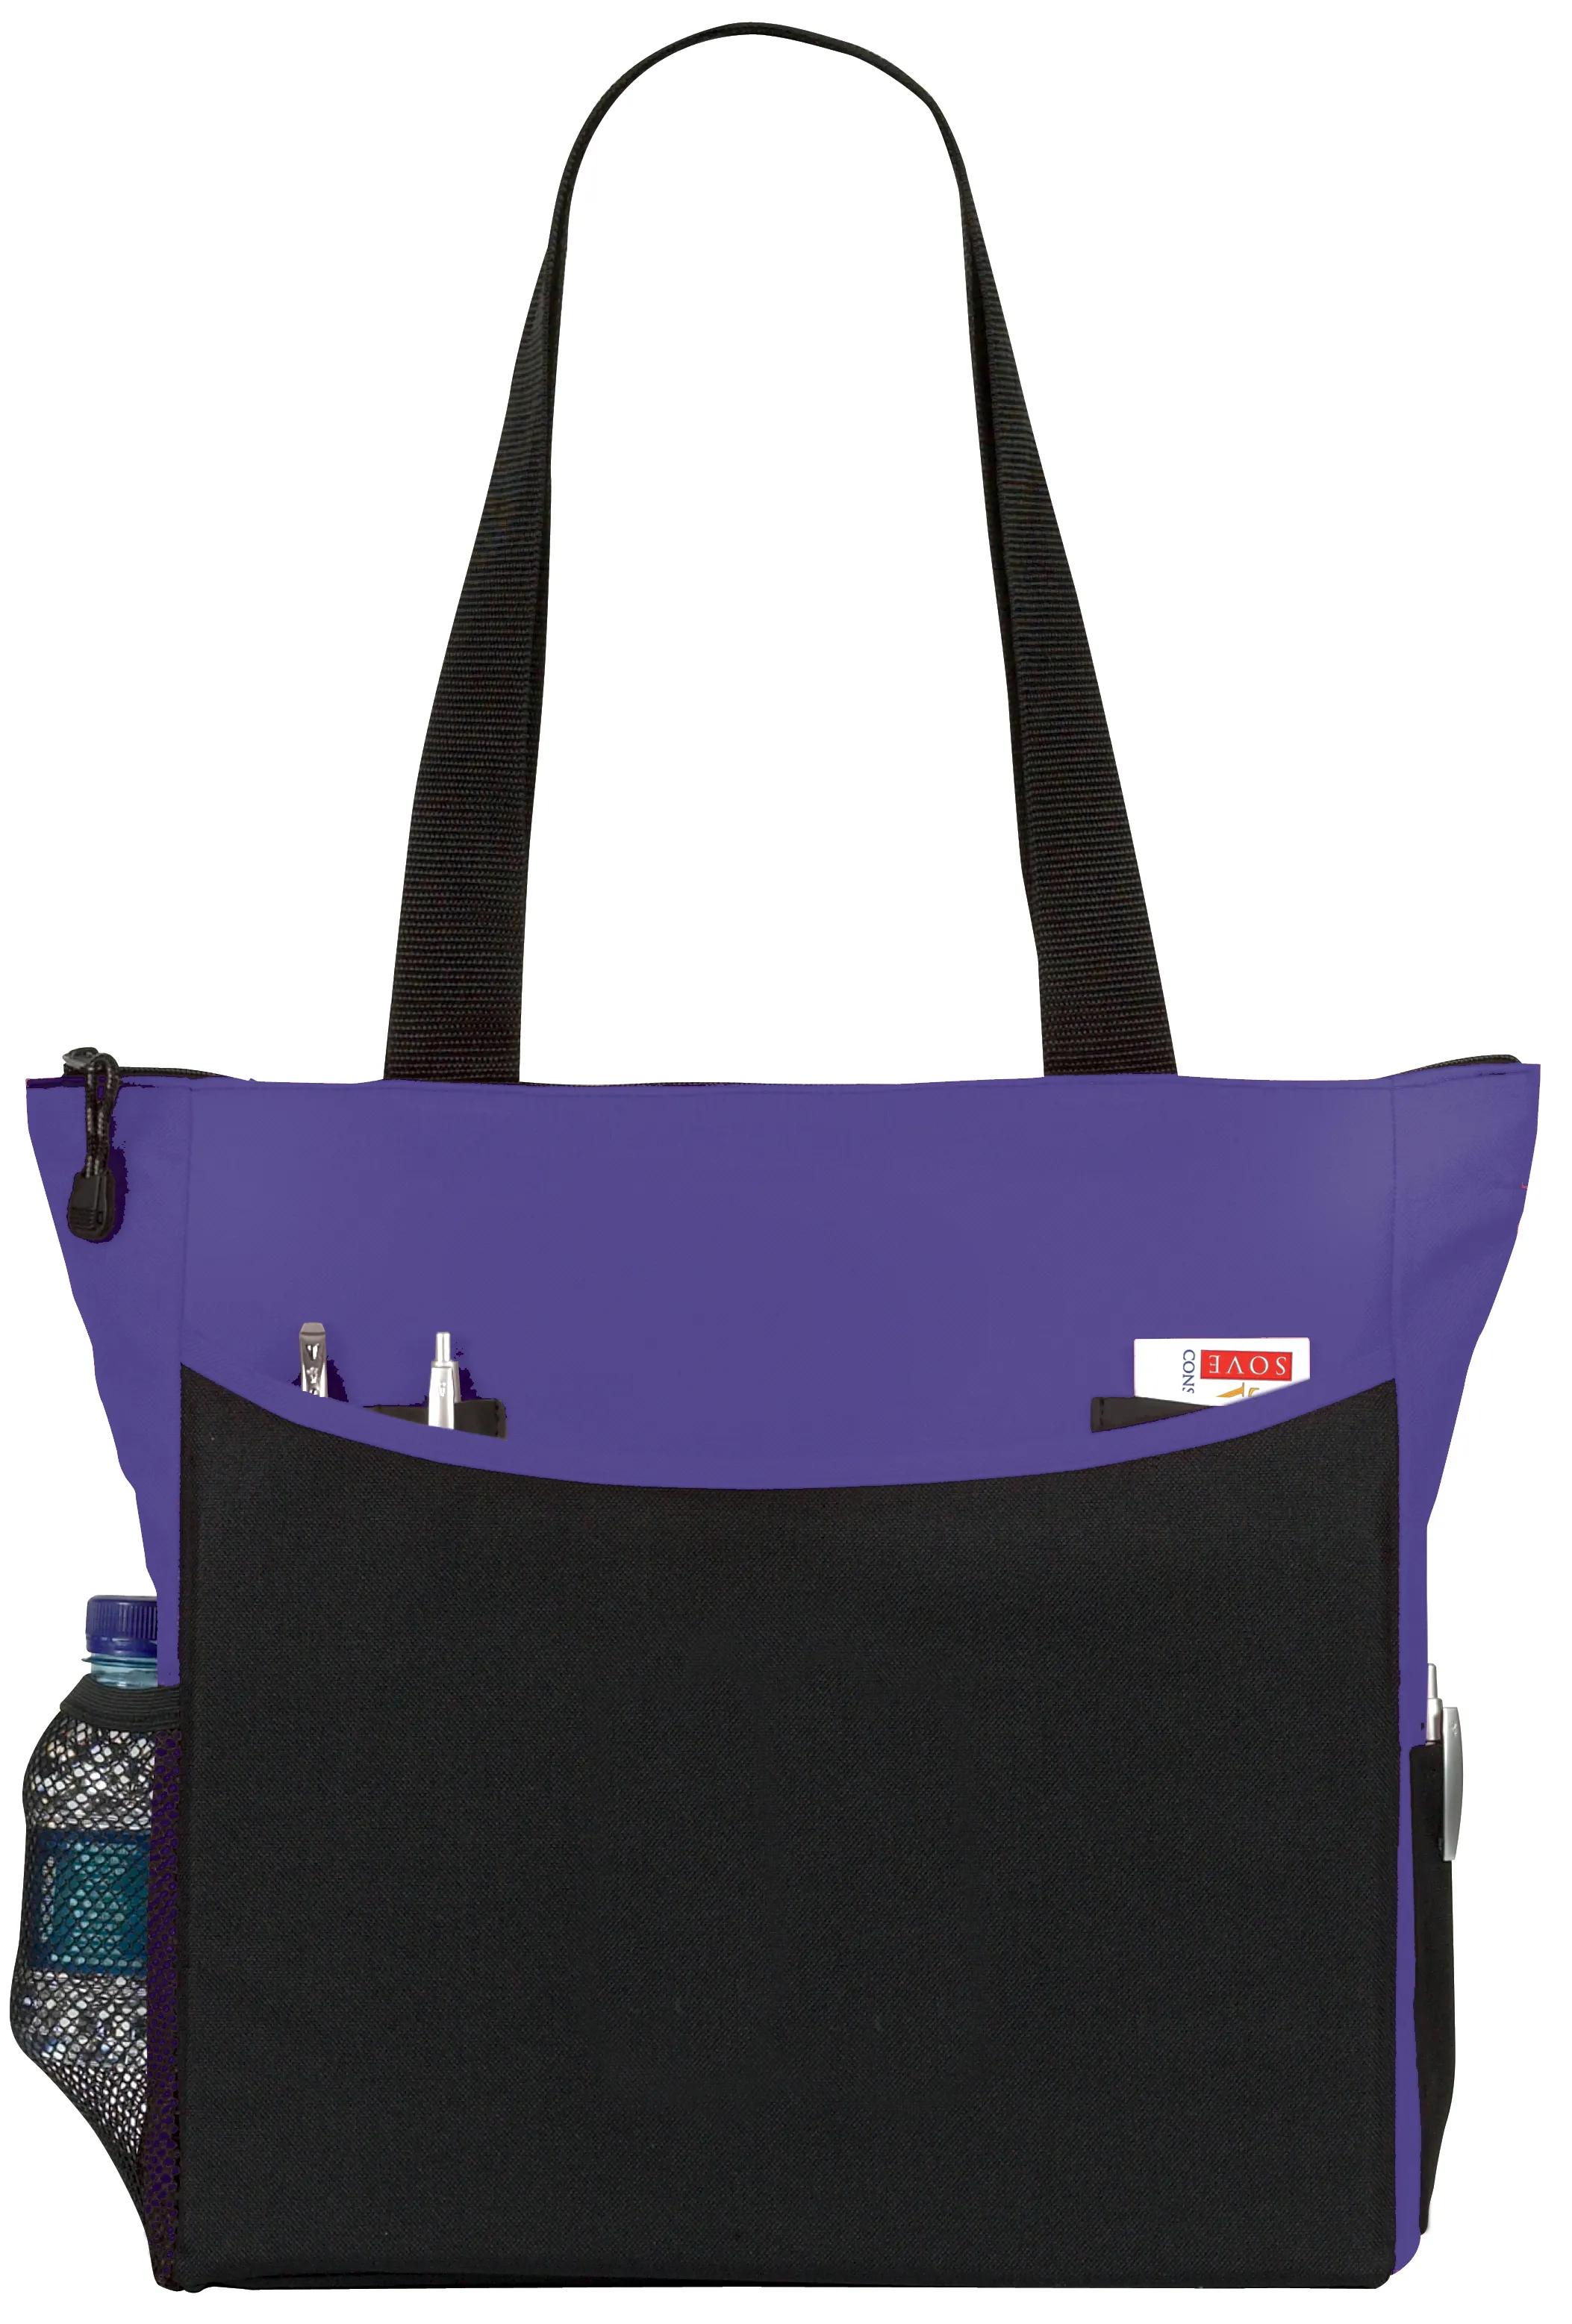 TranSport It Tote 2 of 40